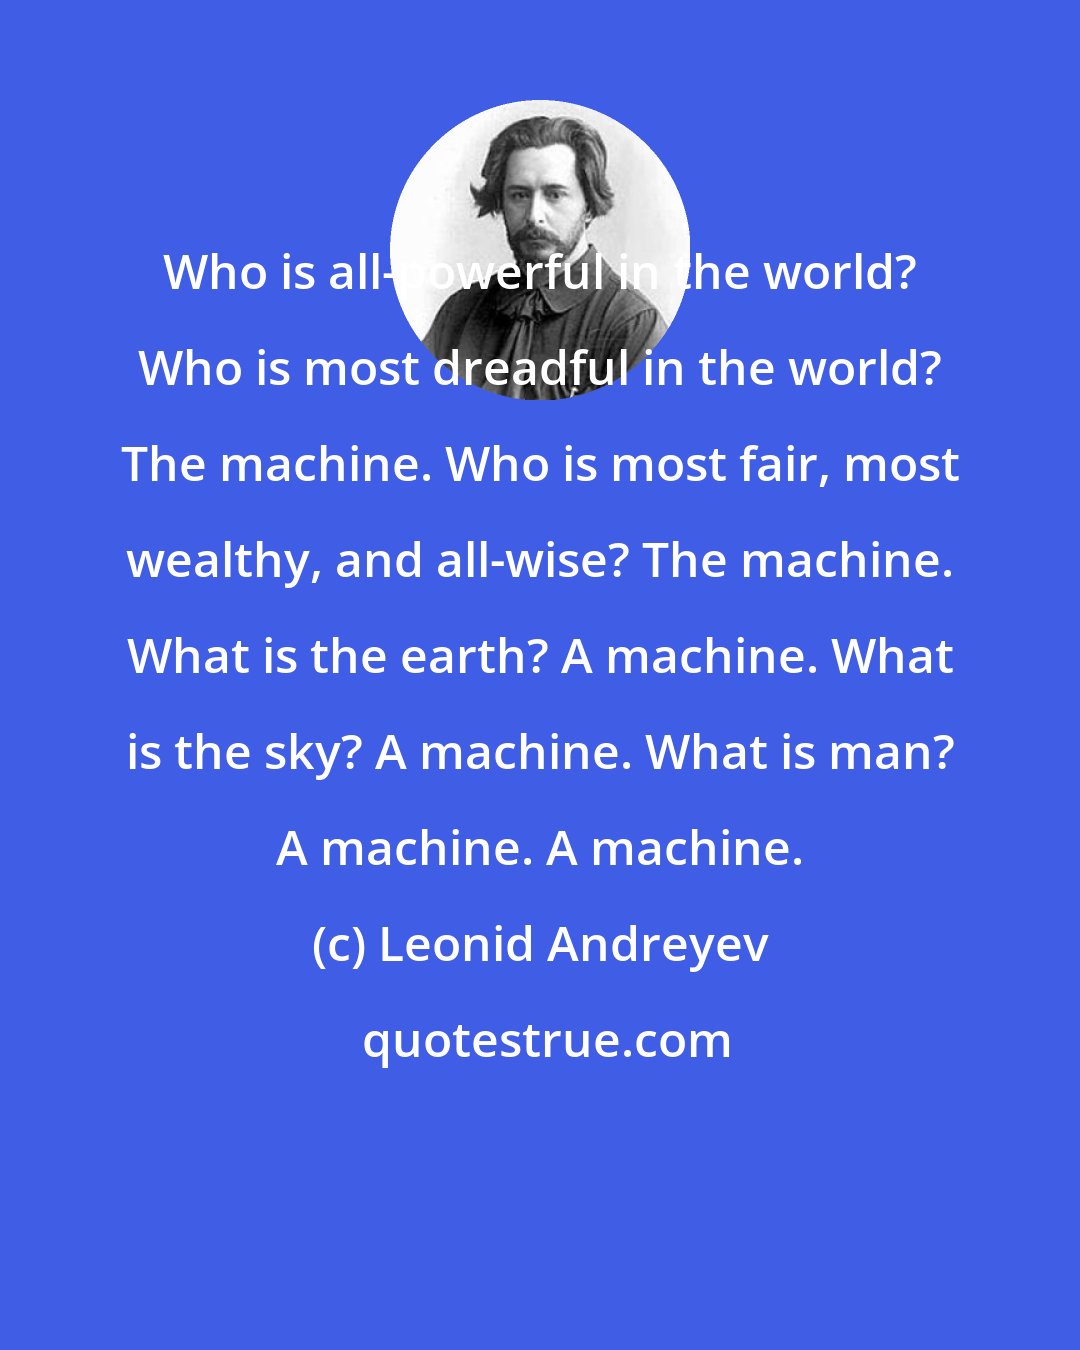 Leonid Andreyev: Who is all-powerful in the world? Who is most dreadful in the world? The machine. Who is most fair, most wealthy, and all-wise? The machine. What is the earth? A machine. What is the sky? A machine. What is man? A machine. A machine.